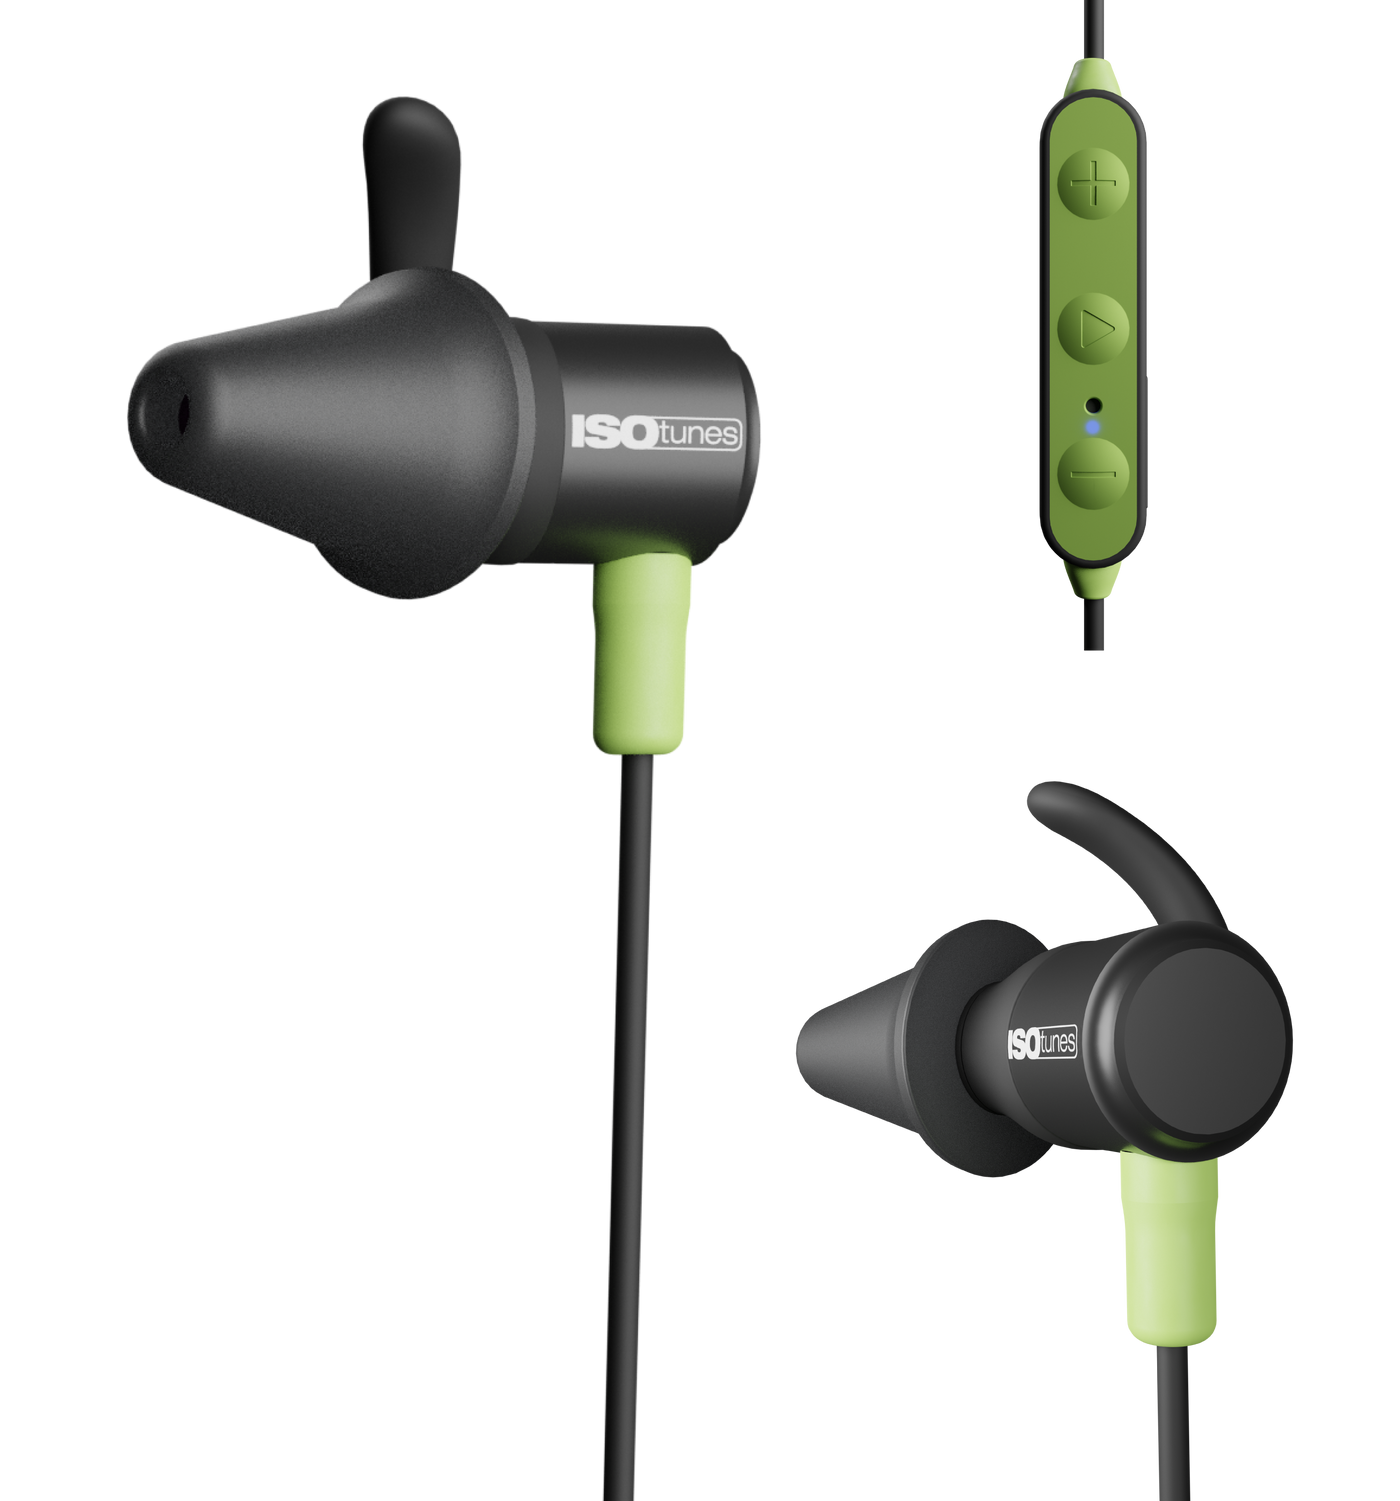 ISOtunes LITE Earbuds Features